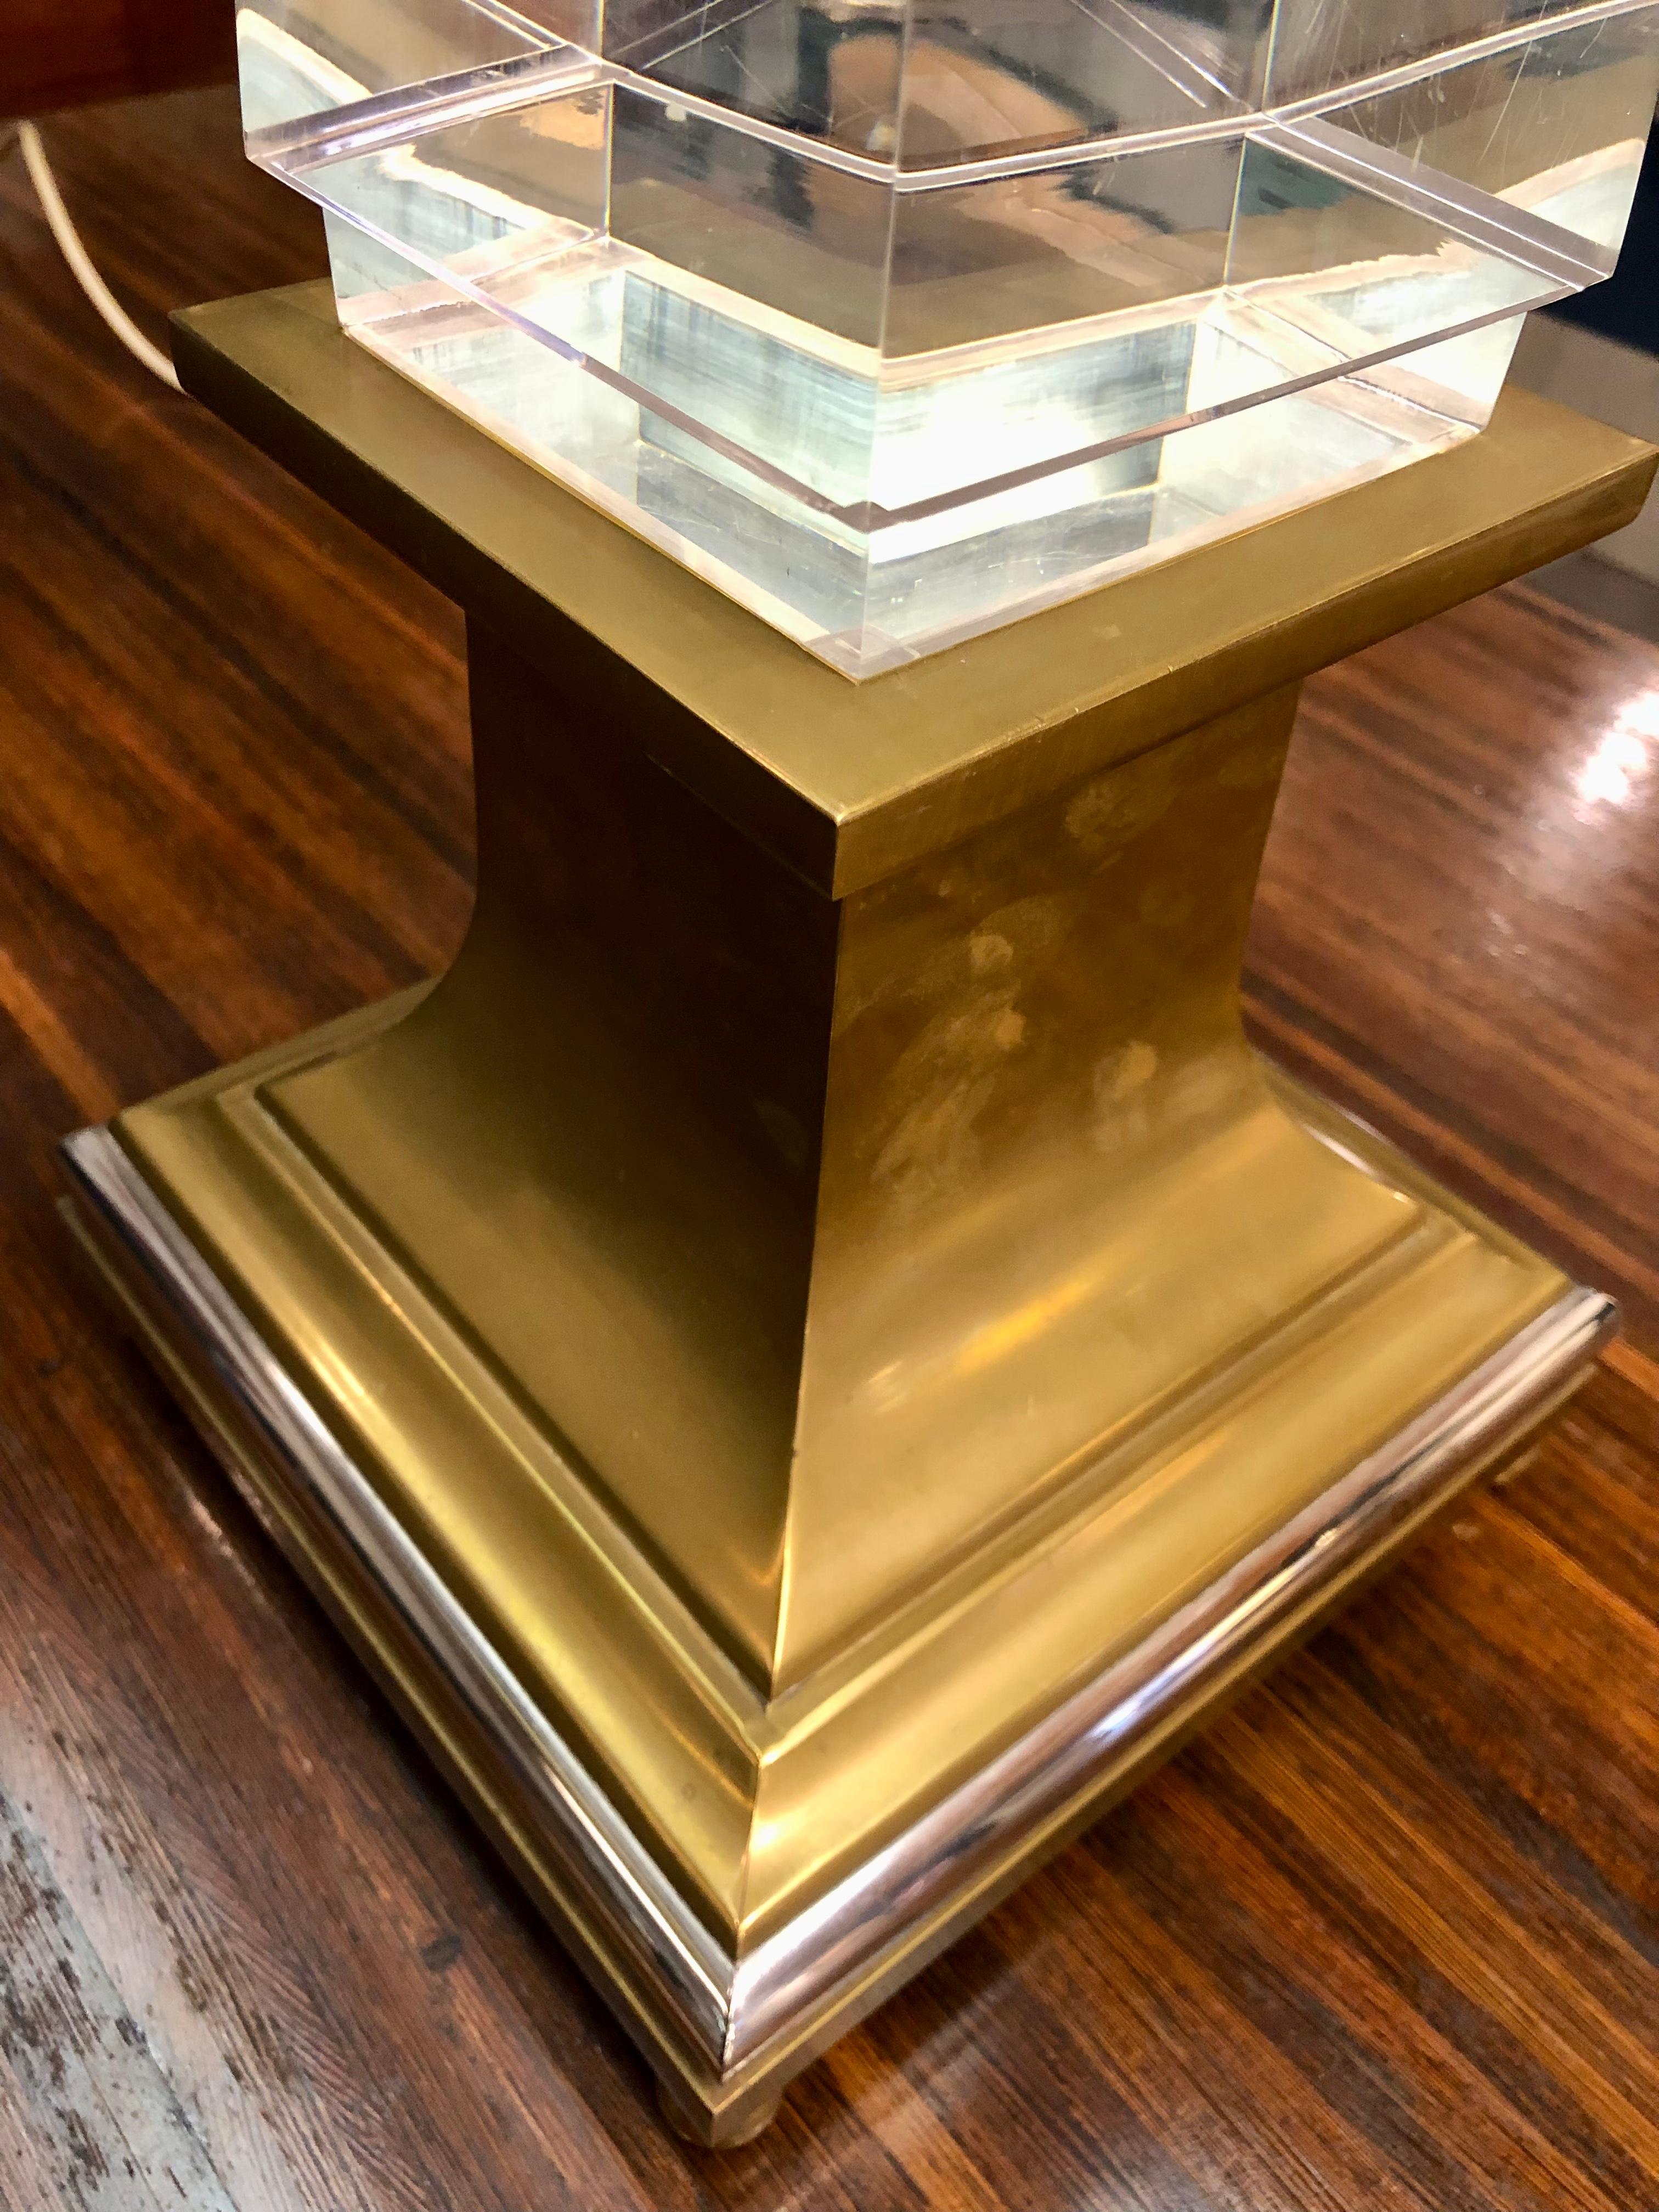 Sandro Petti obelisk lamp for maison Jansen in the seventies.
Made of lucite and brass.
This ambiance light is very stylish and very high quality standards production.